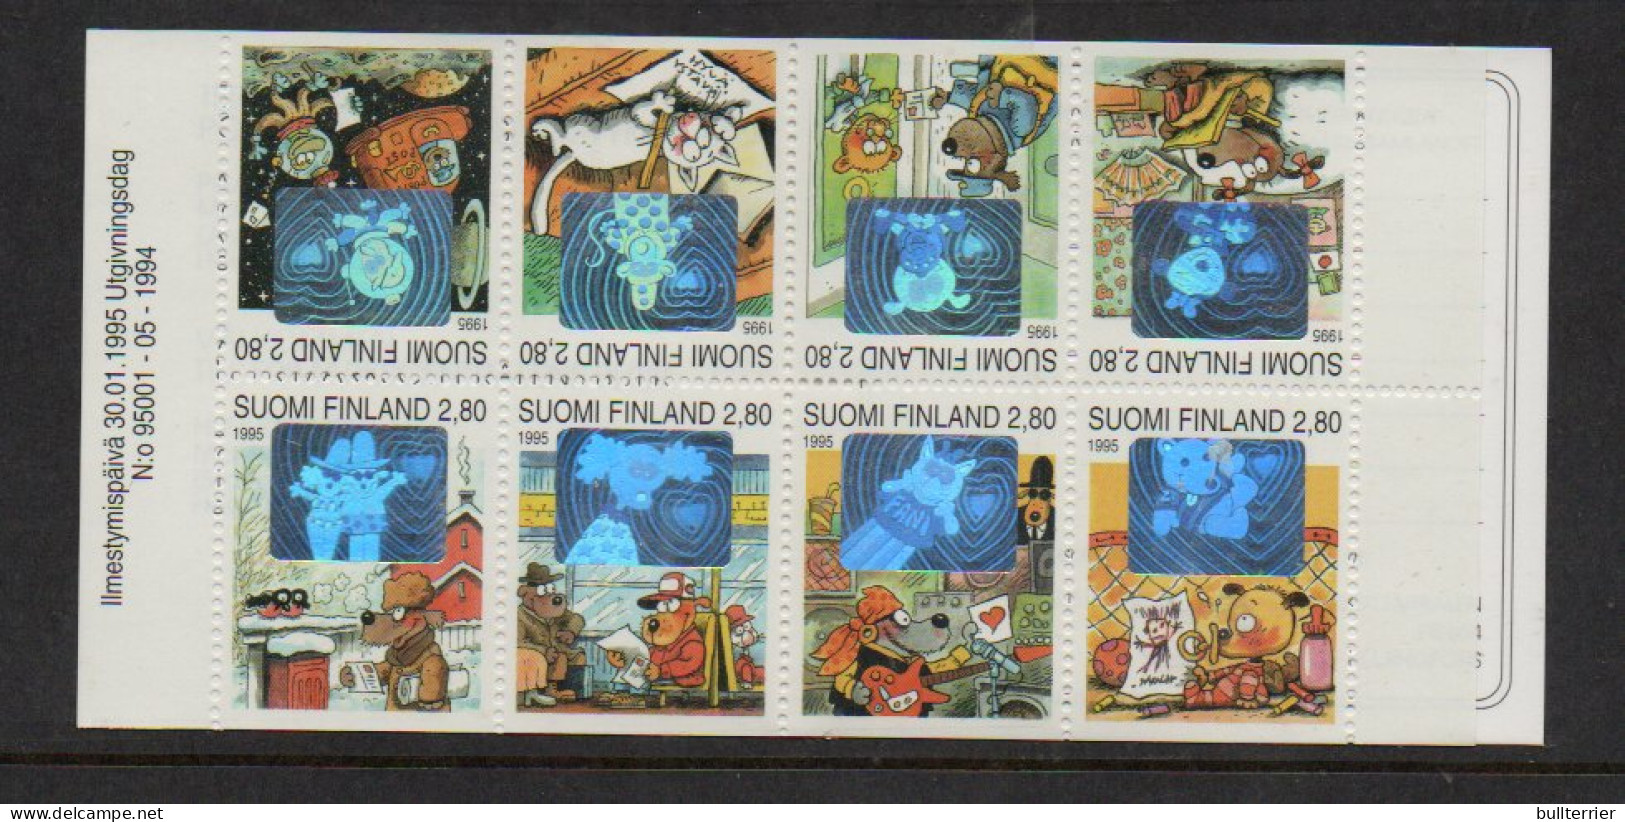 FINLAND - 1995 GREETINGS HOLOGRAM STAMPS BOOKLET COMPLET  MINT NEVER HINGED  SG CAT £20 - Neufs